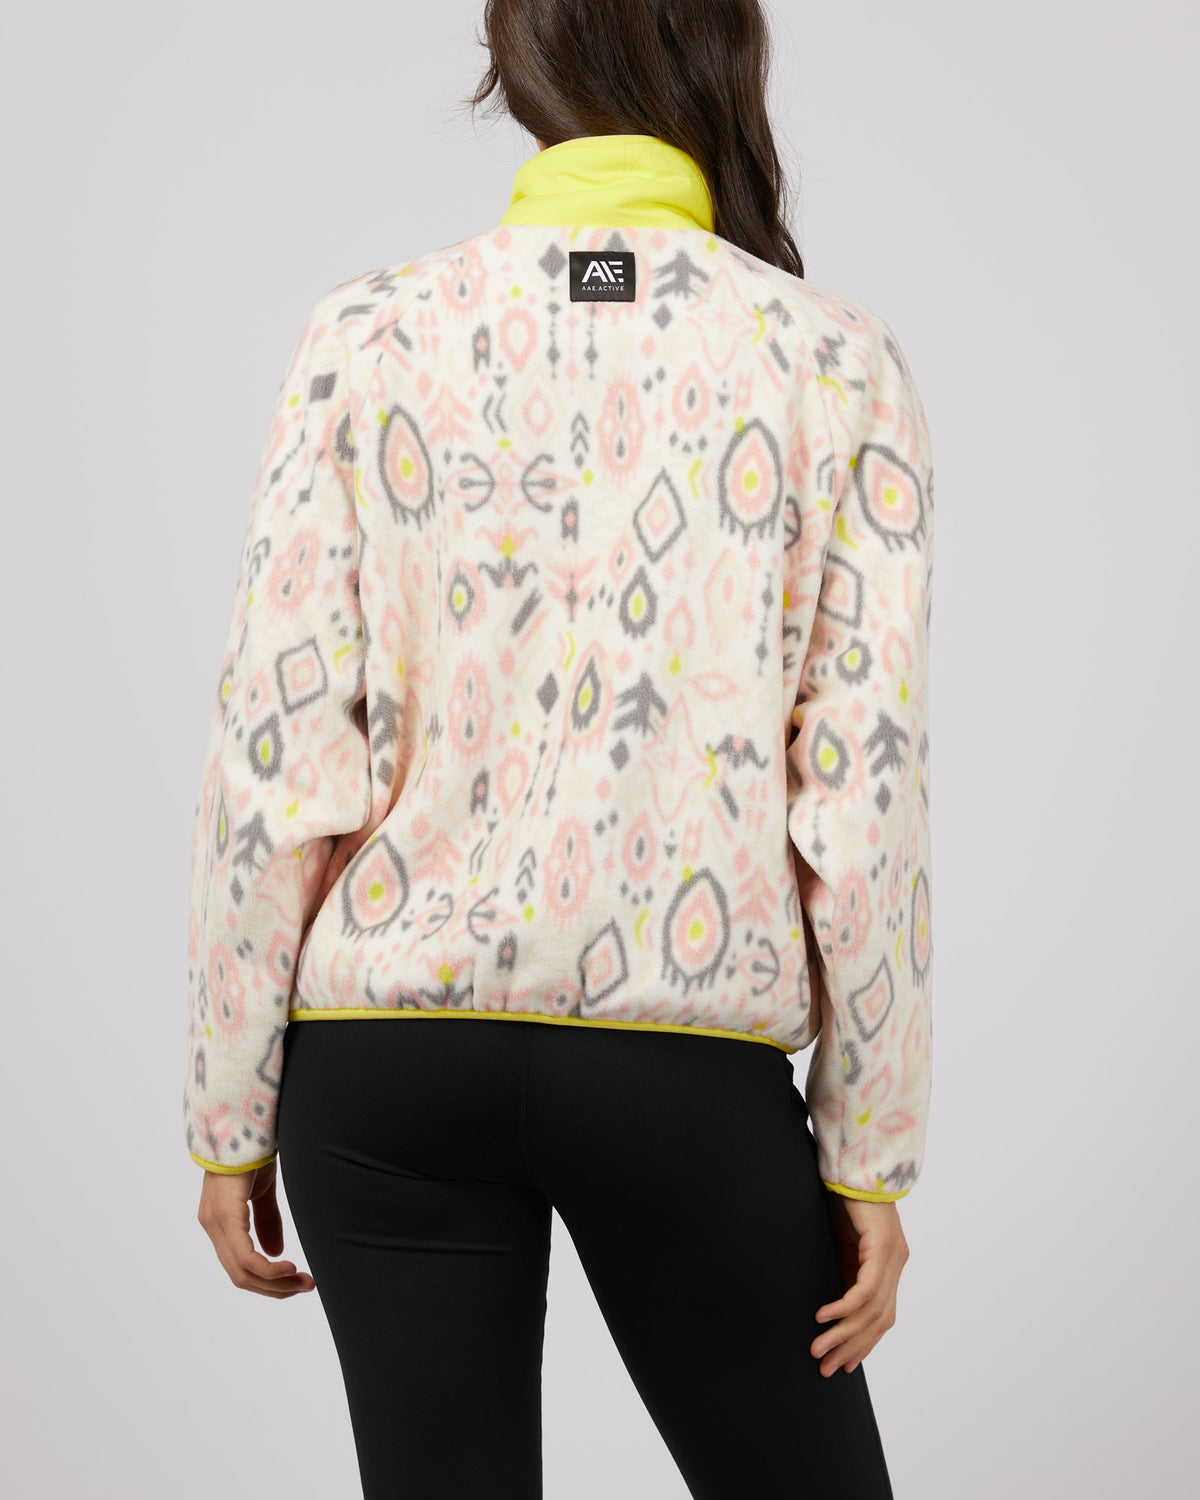 All About Eve-Explore Teddy Jacket Print-Edge Clothing